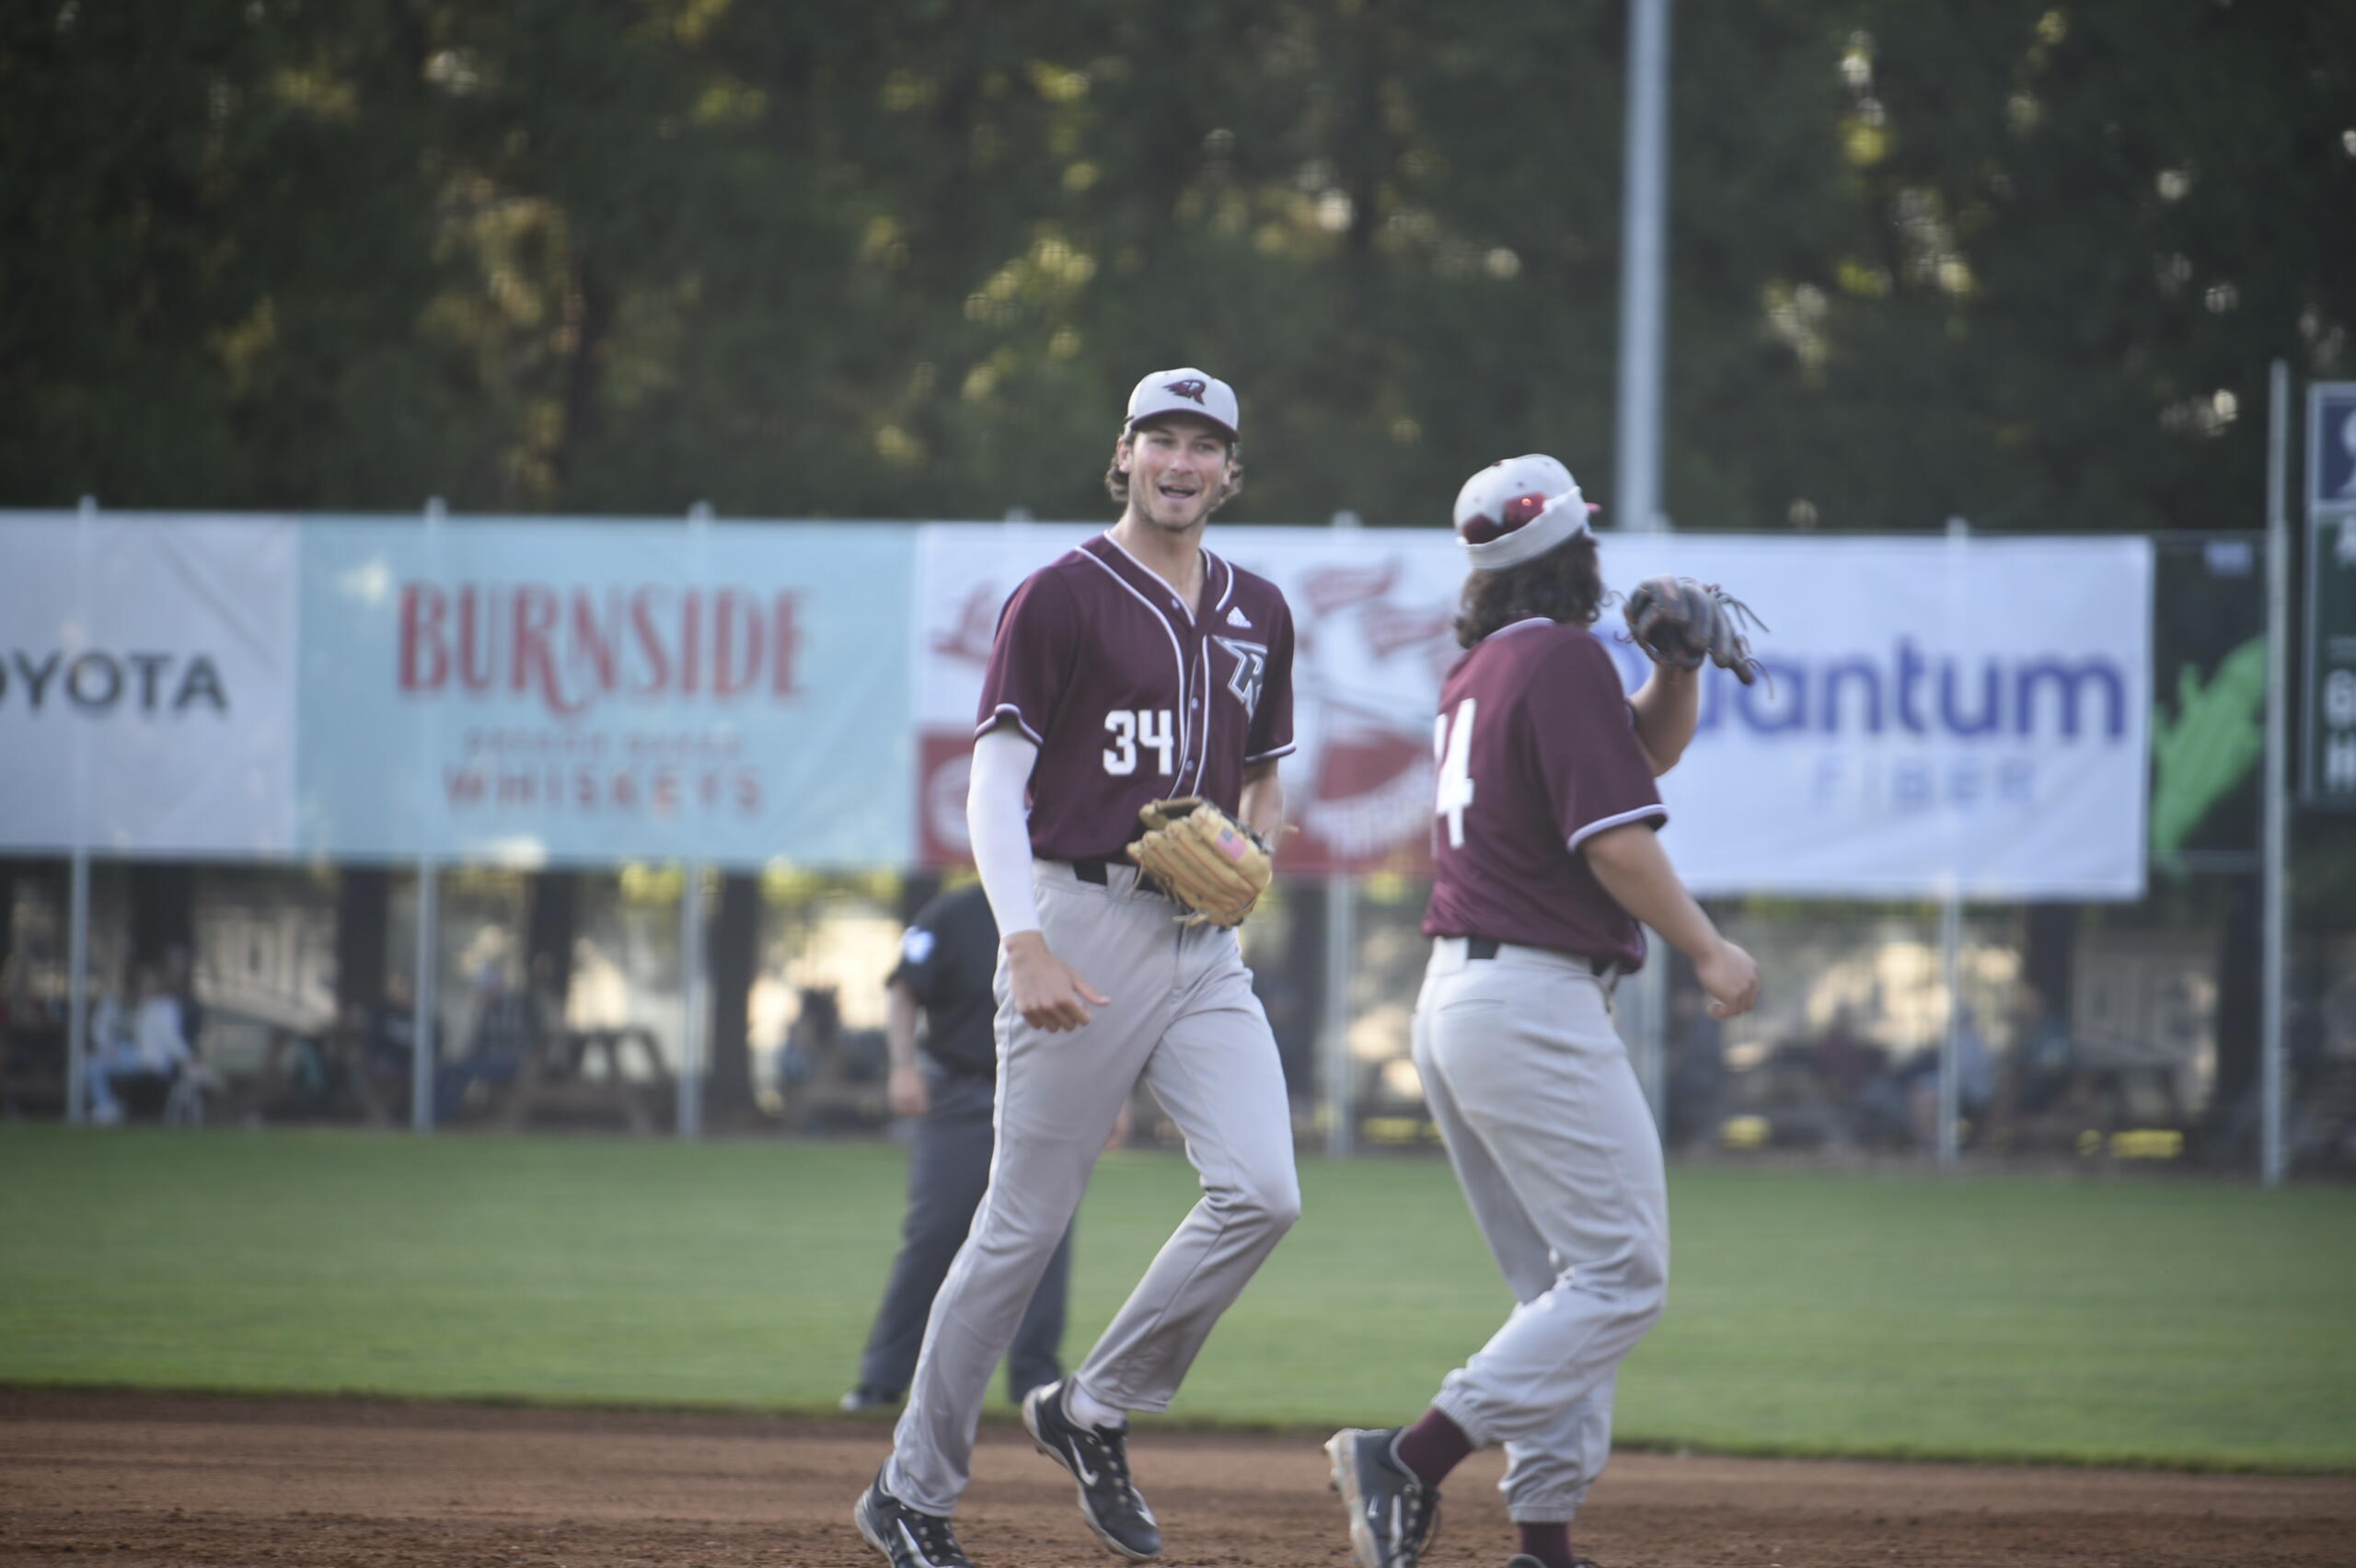 Ridgefield Raptors outfielder Tristan Gomes, left, is greeted by outfielder Jake Tsukada after Gomes made a leaping catch in left field to end the third inning against the Portland Pickles at Walker Stadium in Portland on Wednesday, June 14, 2023.